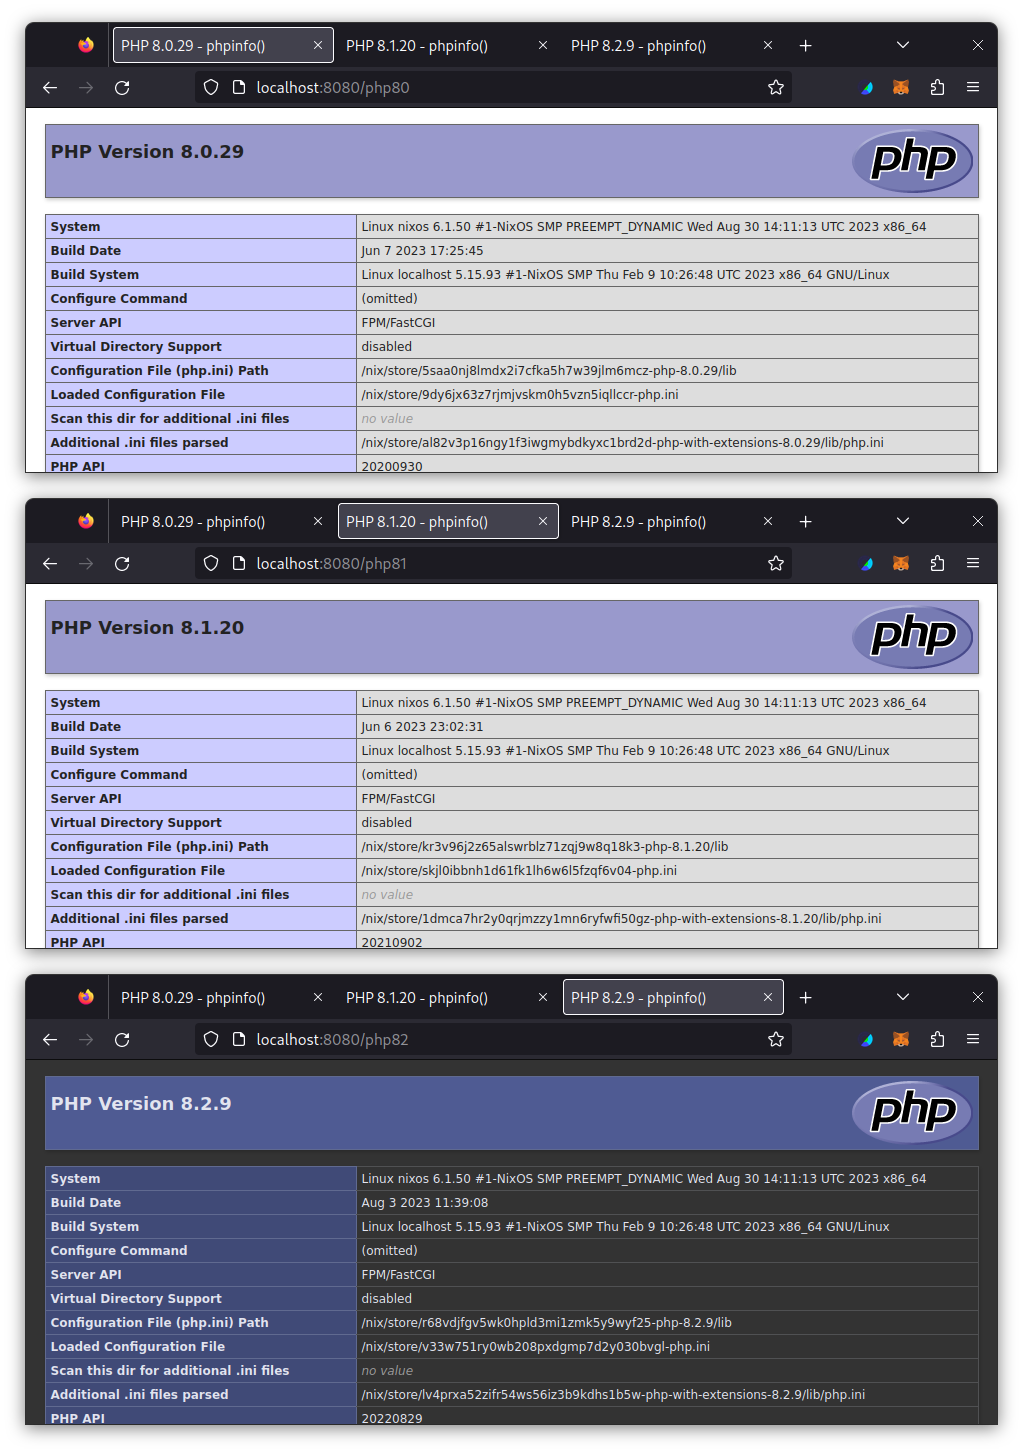 Multiple Browser Queries with different PHP prefixes on Our Webserver Show Different PHP Engine Version Numbers